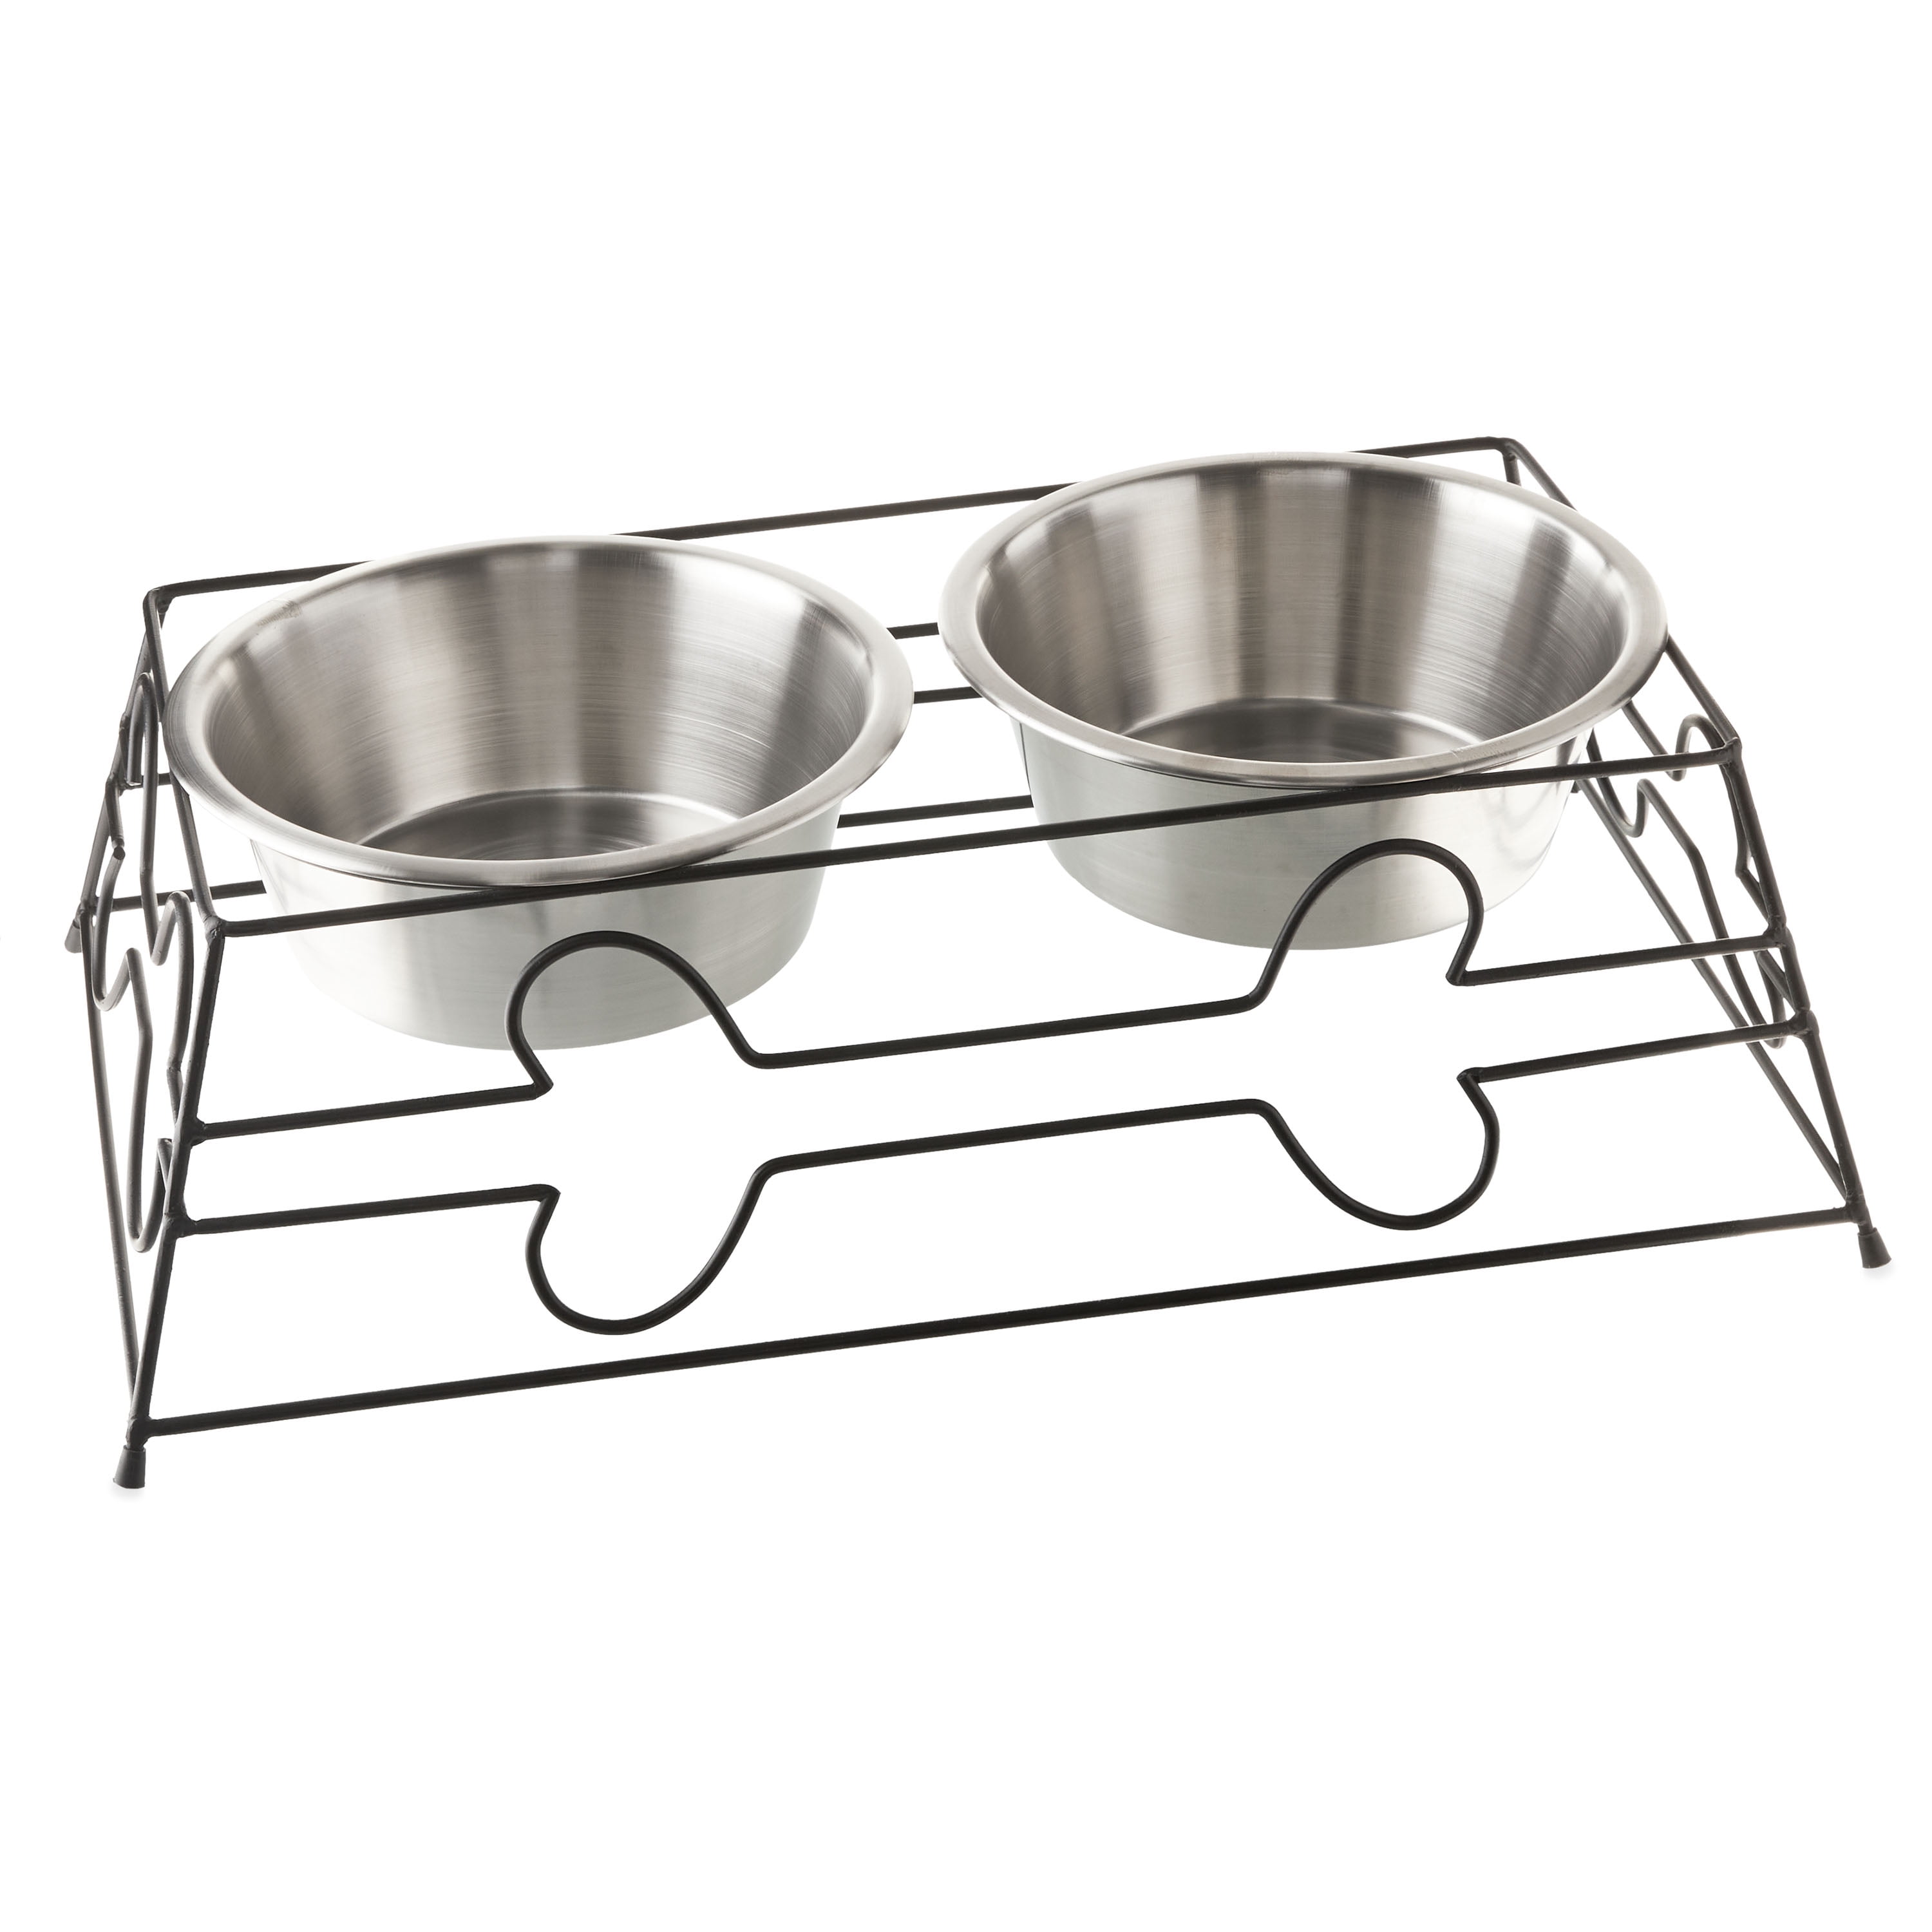 Dog Bowl Stand With Storage Perfect for Two Large Dogs. Rustic